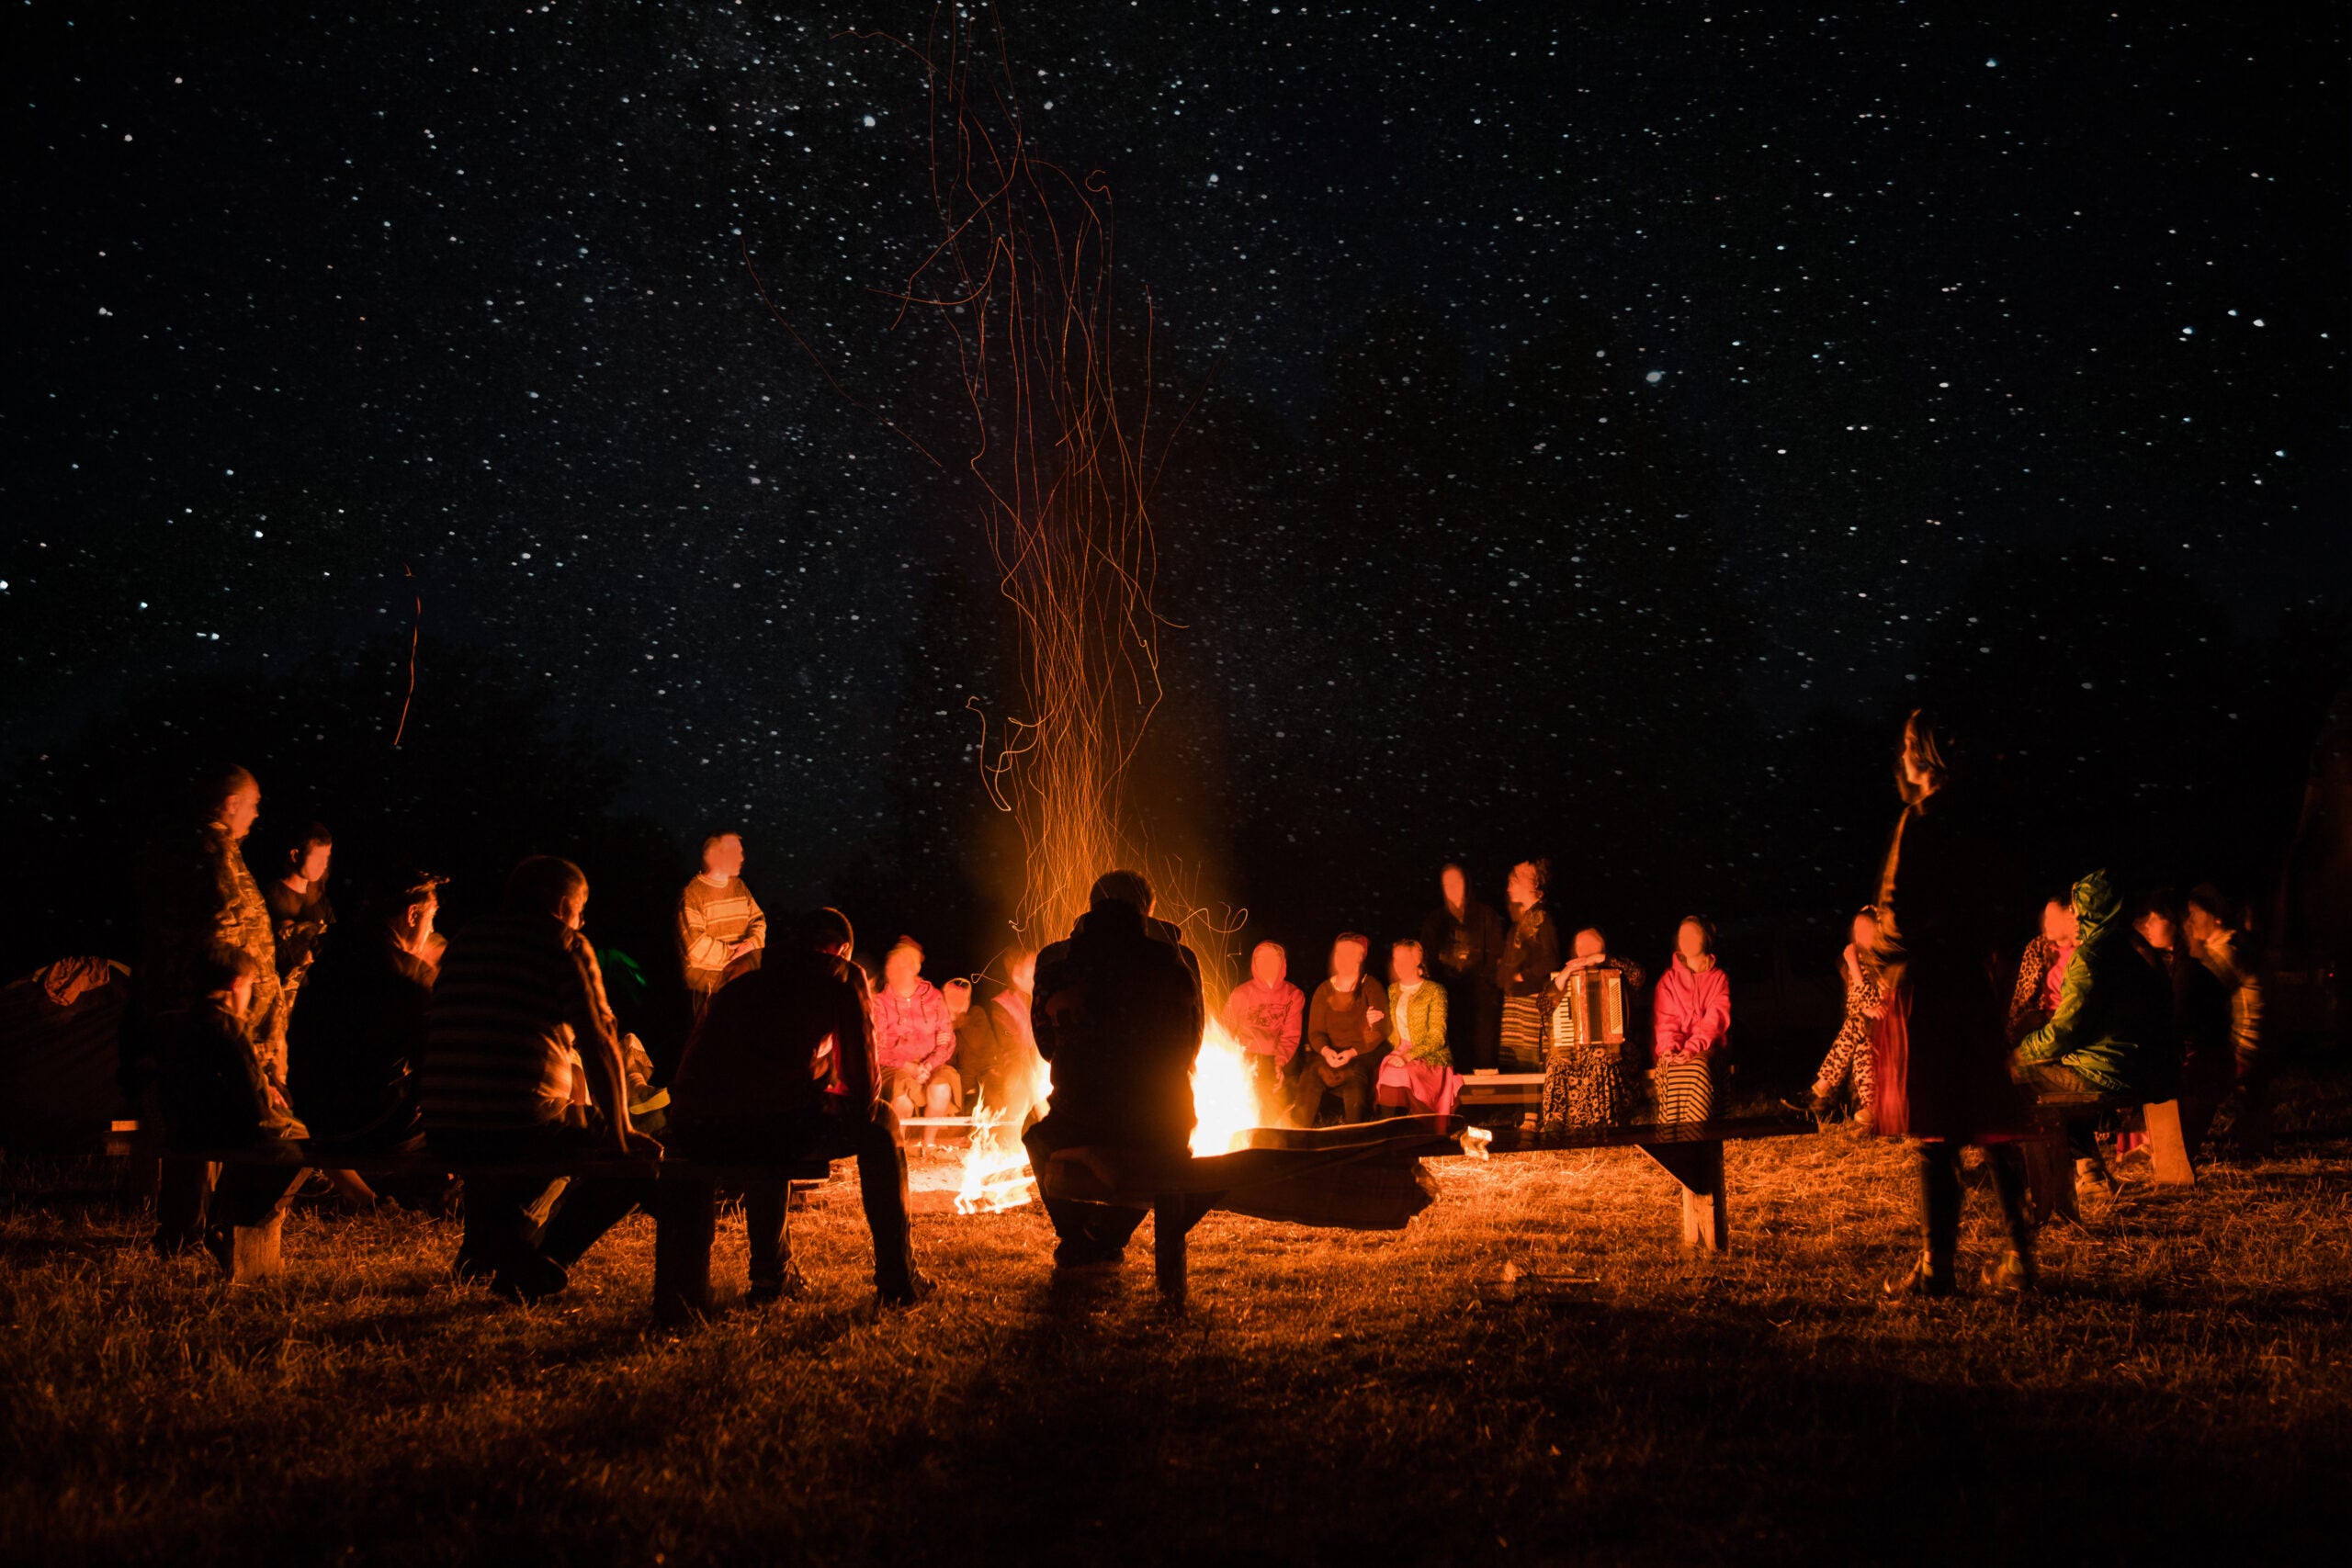 A large group of people stands around a blazing fire at night.